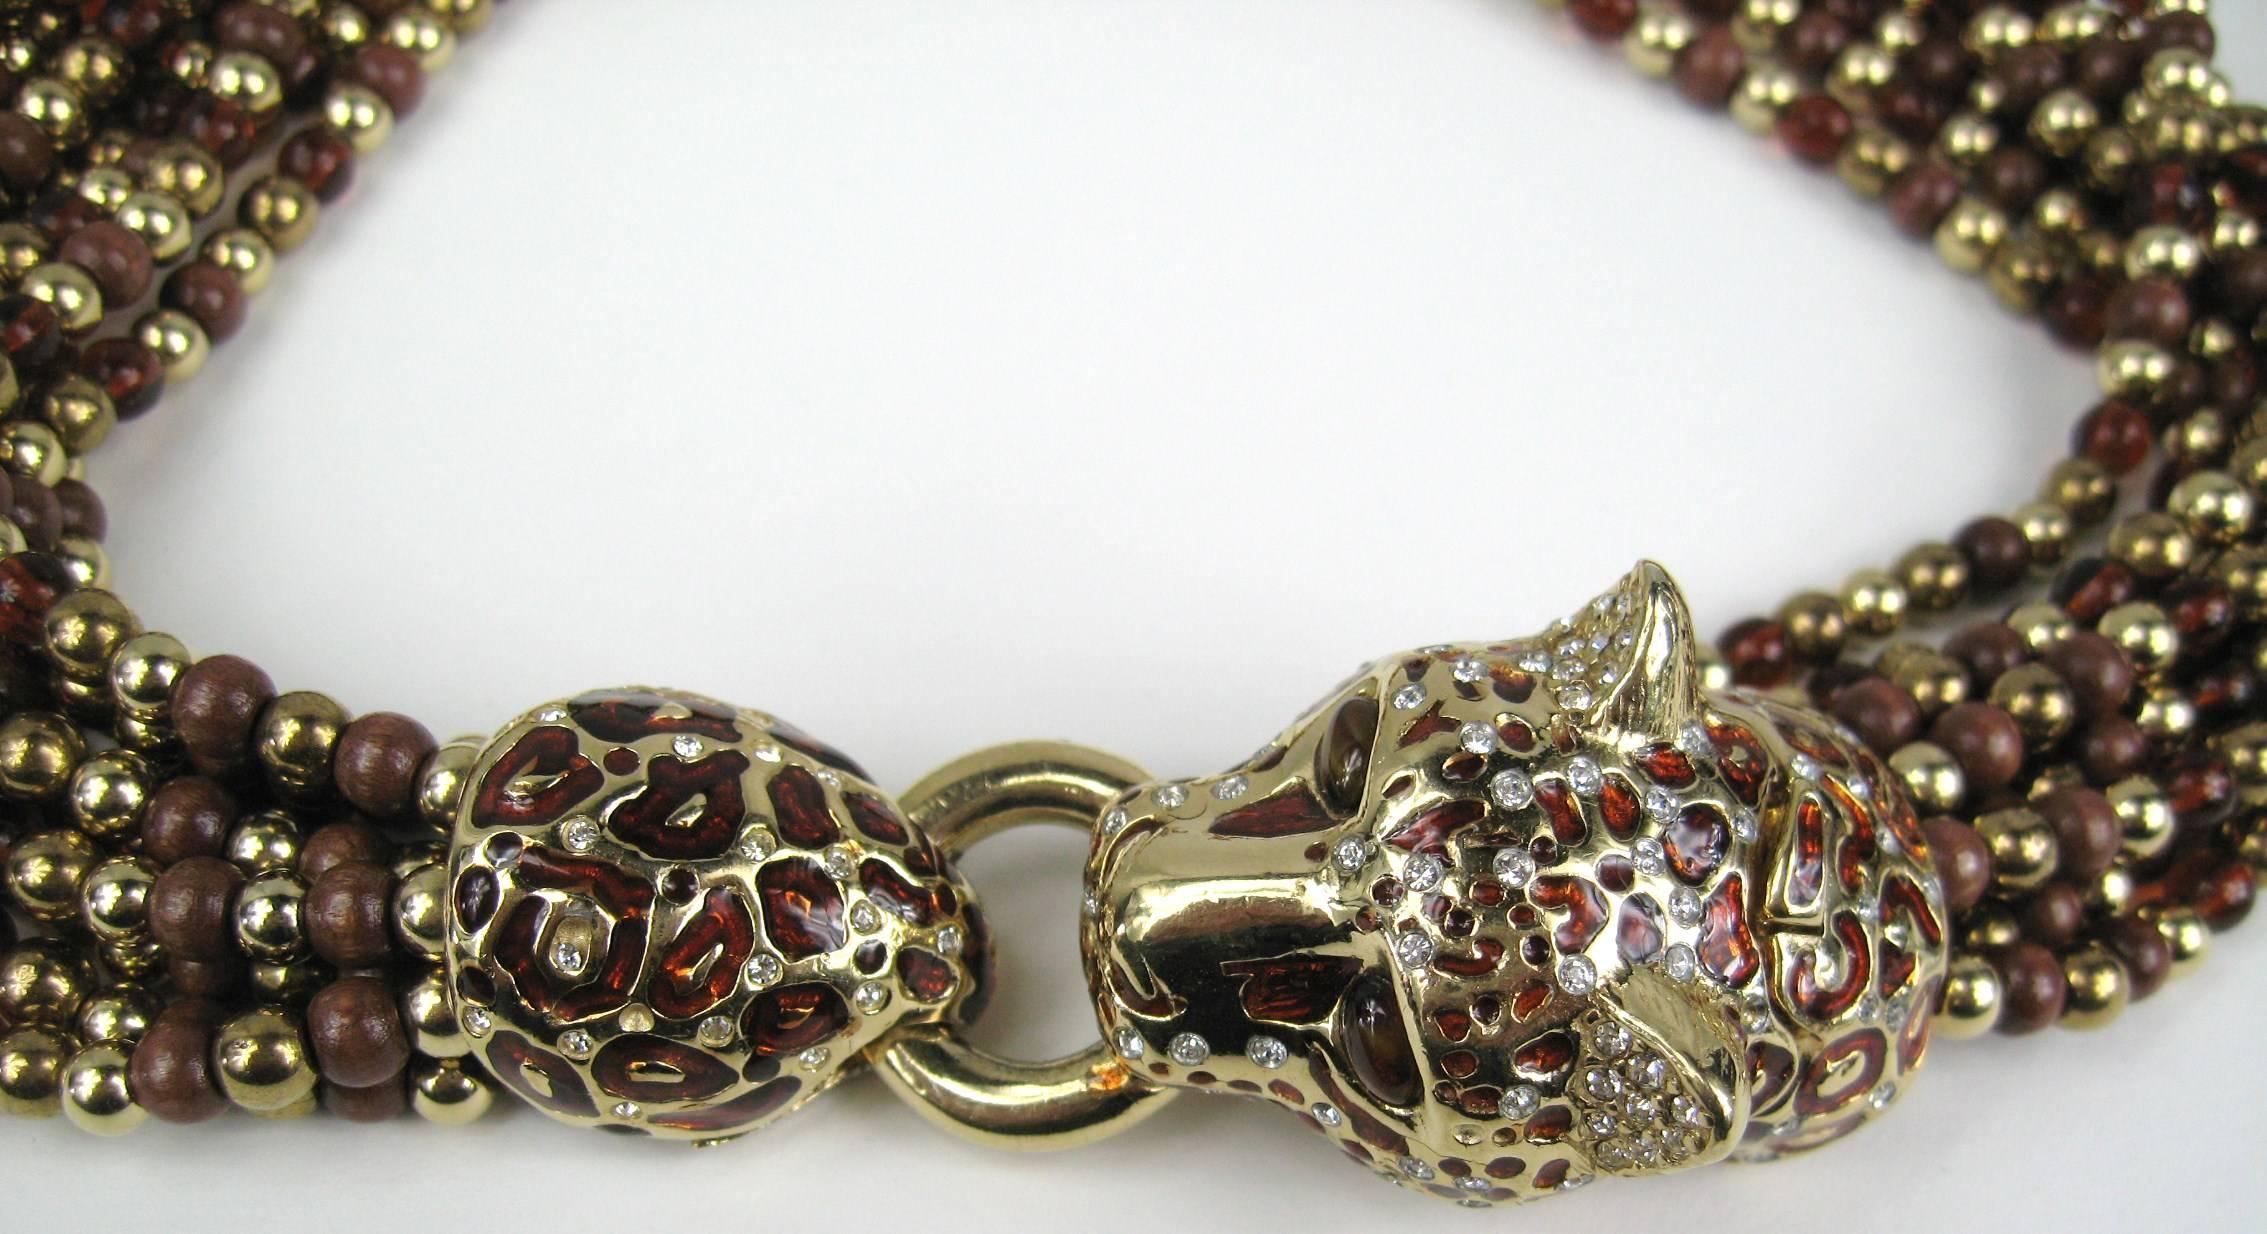 Ciner Crystal Choker Leopard  Necklace 9 Strands of gold tone and brown beading on the necklace. Measuring 17.75 inches long end to end. Clasp is a Enameled Leopard head. Matching Earrings are available on our store front as well. Last photo shows